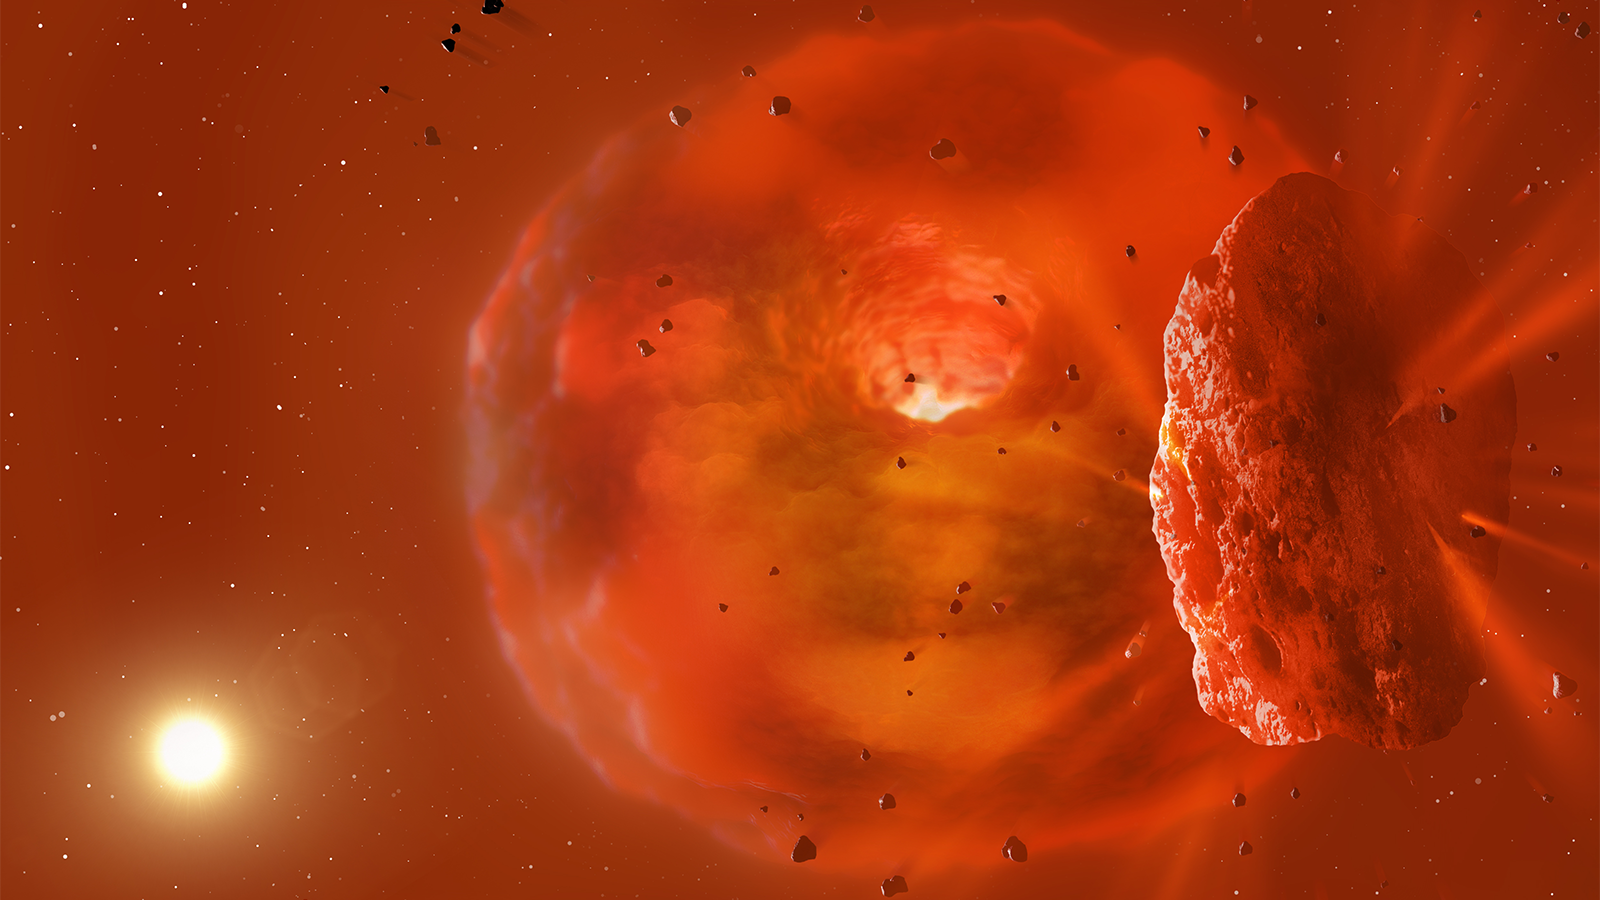 slide 5 - This illustration depicts the aftermath of a collision between two giant exoplanets. What remains is a hot, molten planetary core and a swirling, glowing cloud of dust and debris. Credit: Mark A. Garlick 